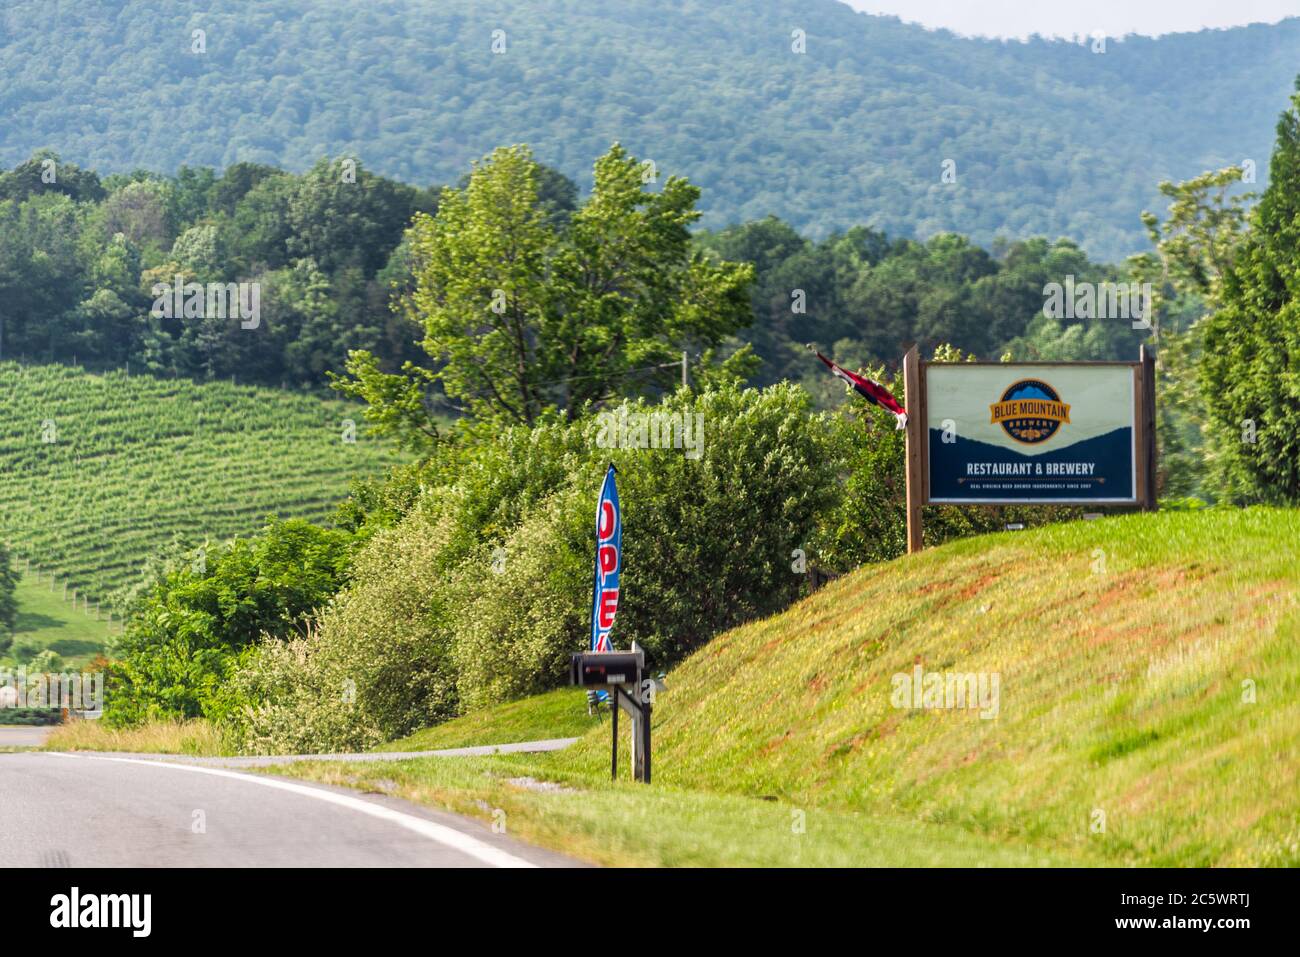 Afton, USA - June 9, 2020: Nelson County, Virginia countryside with road sign for Blue Mountain brewery tasting room open Stock Photo